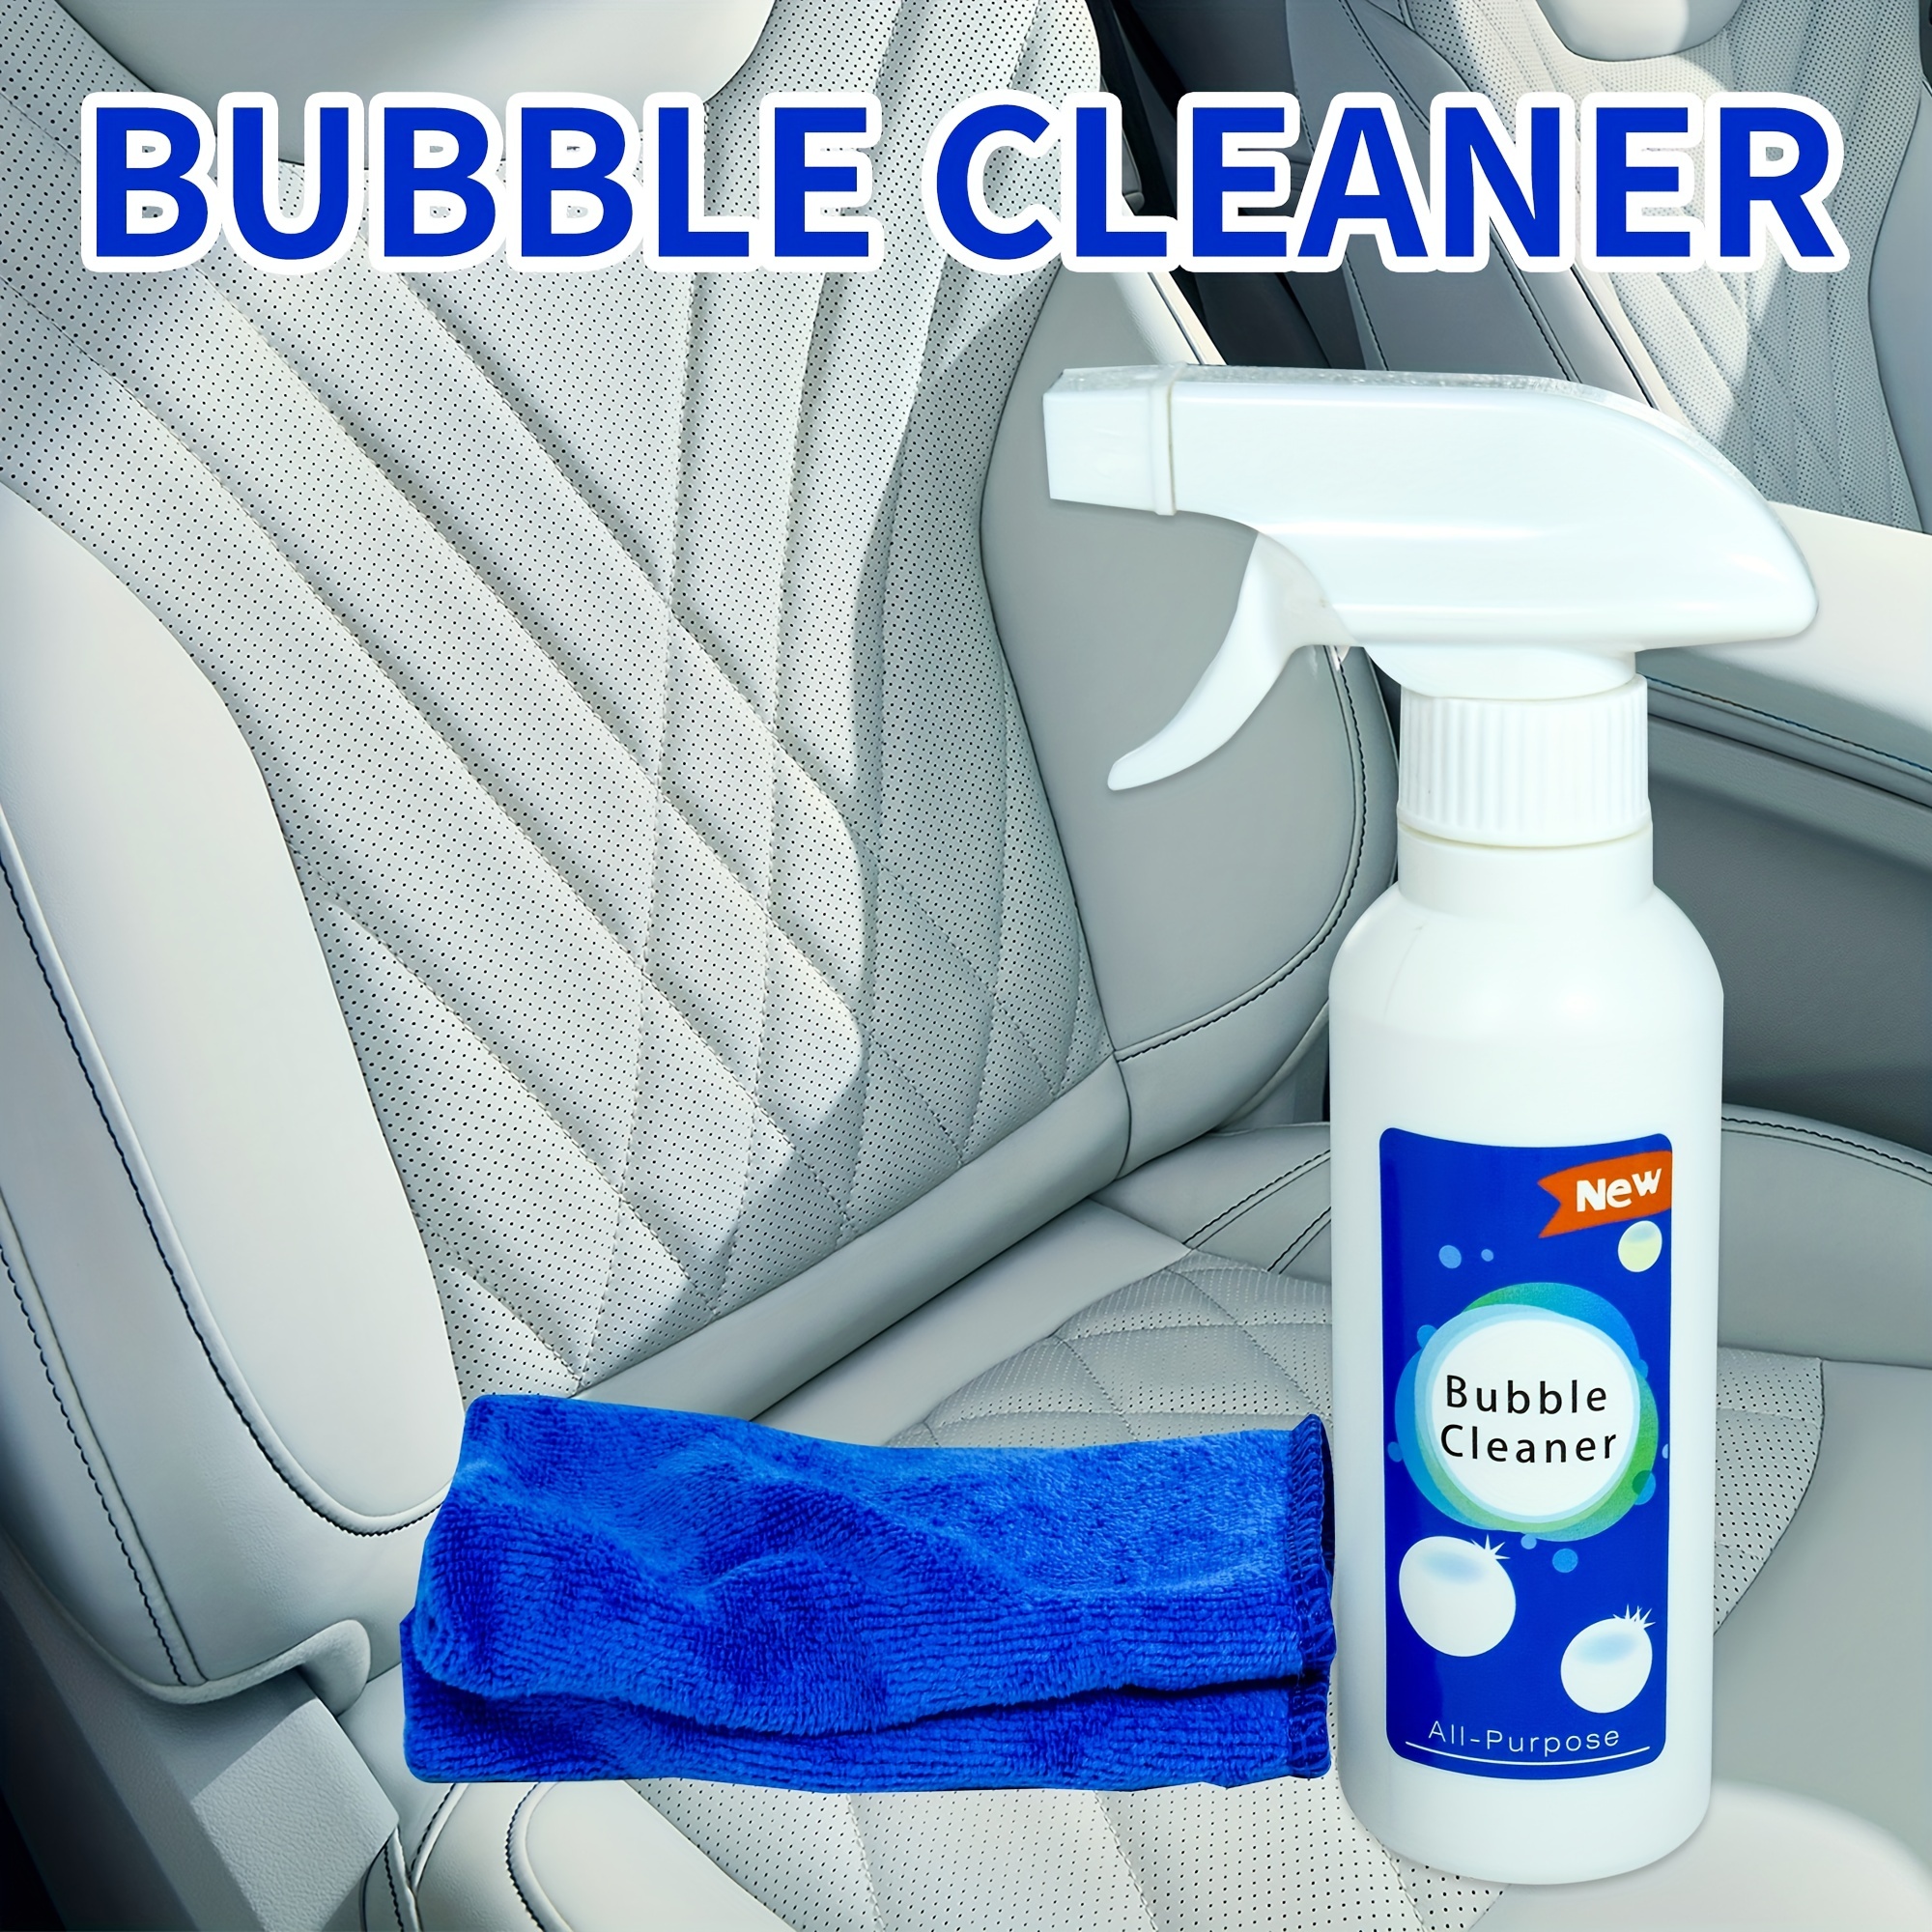 All-Purpose Bubble Cleaner Foam Spray, Kitchen Bubble Cleaner Spray,  Foaming Heavy Oil Cleaner Remover Powerful Stain Remover, All Purpose  Rinse-free Cleaning Spray 